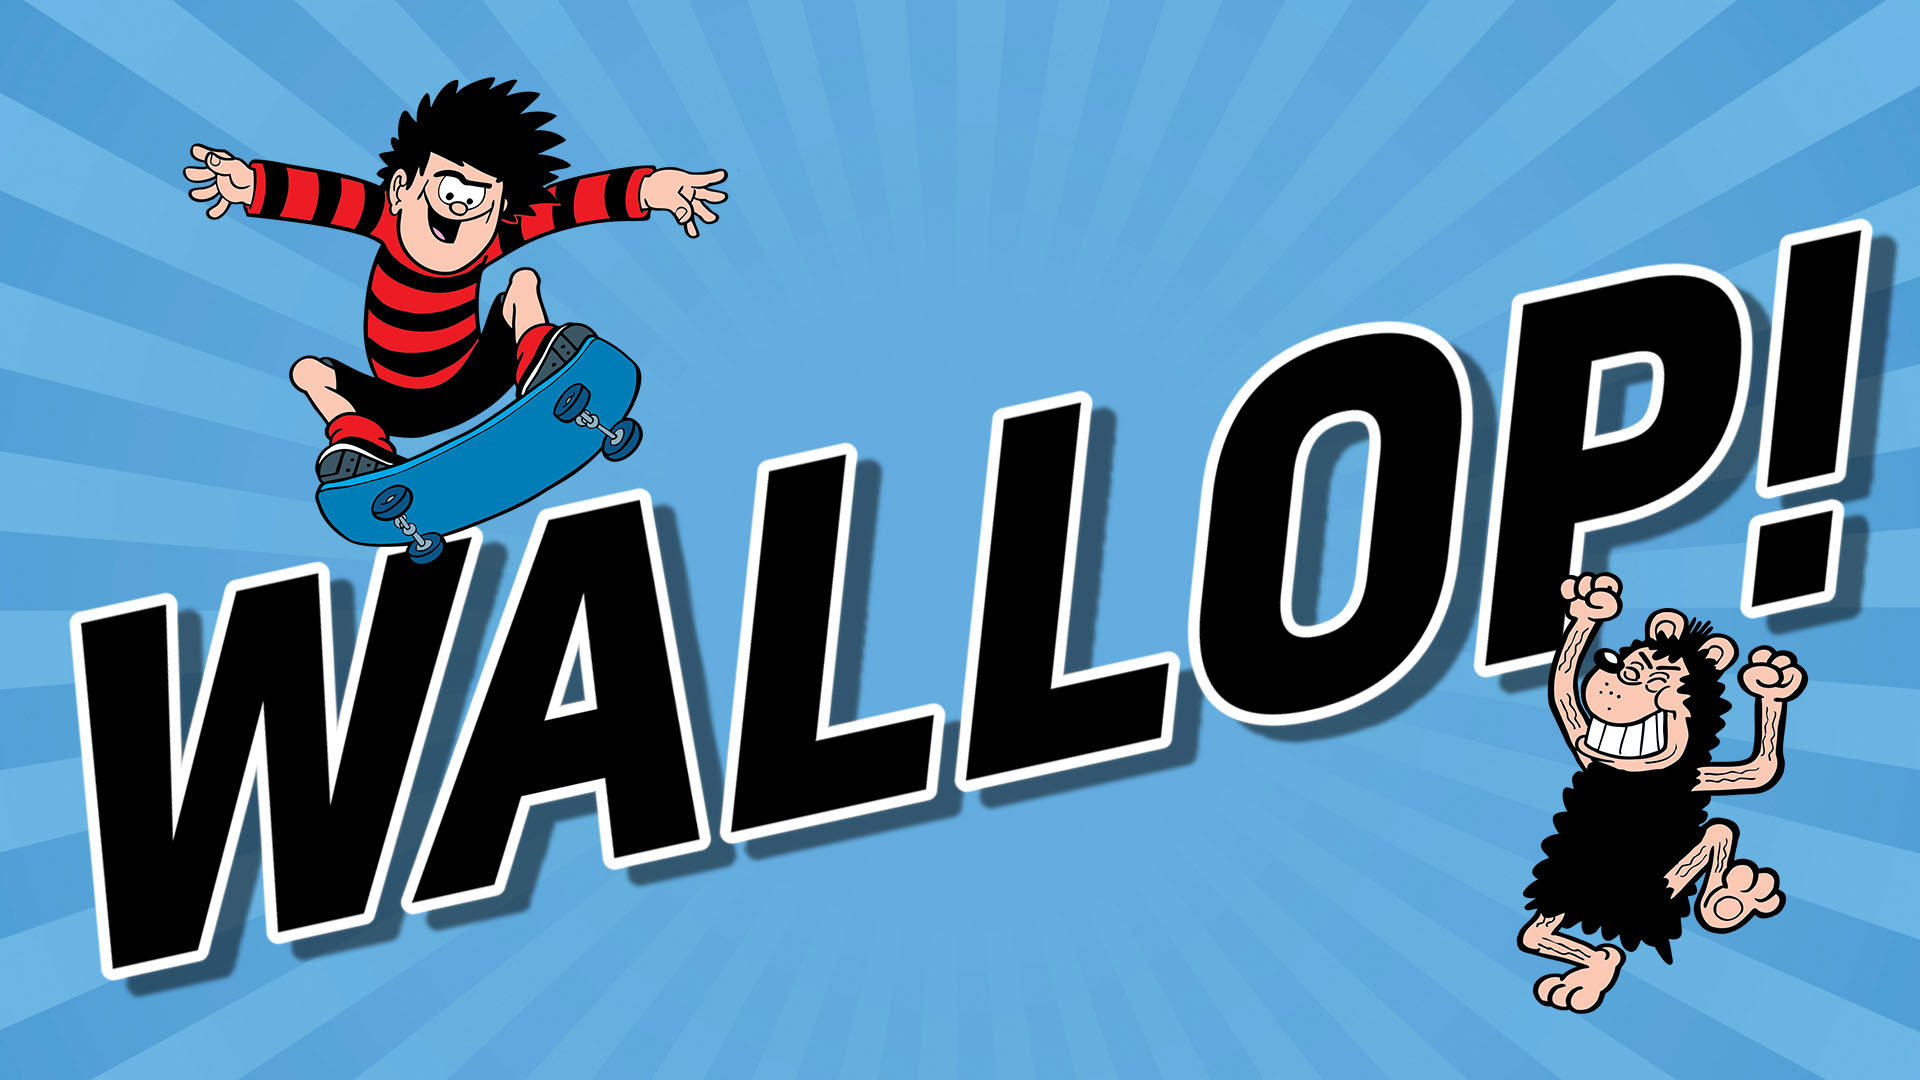 Dennis, Gnasher and the word wallop